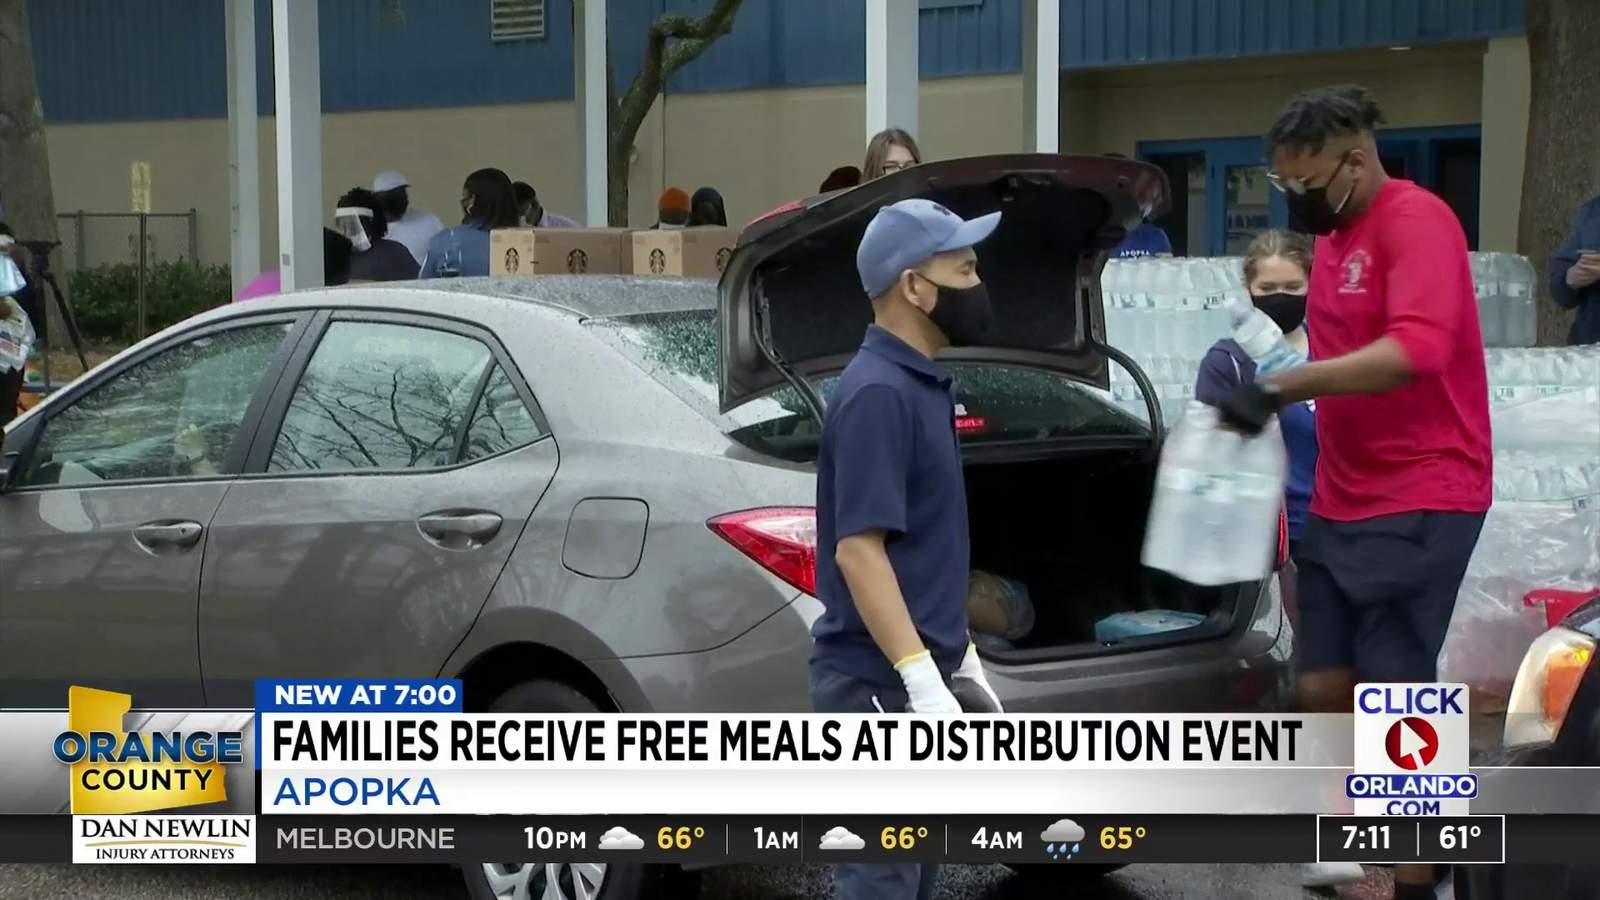 ‘I’ll be glad to eat food tonight:’ Hundreds of families receive free meals at Apopka Farm Share food giveaway